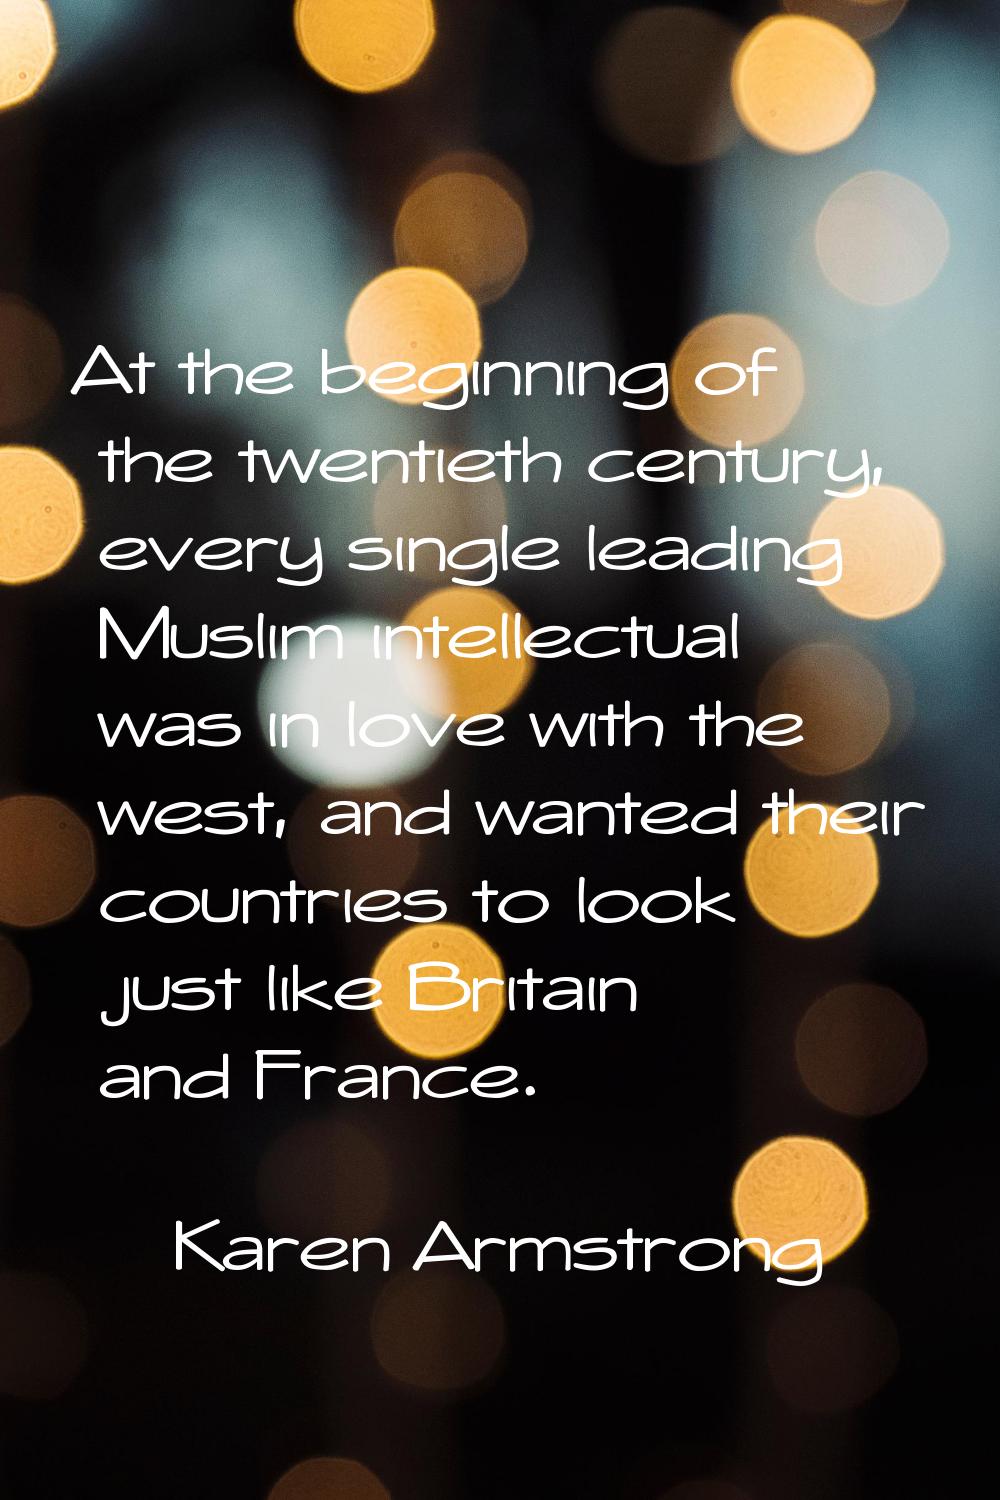 At the beginning of the twentieth century, every single leading Muslim intellectual was in love wit